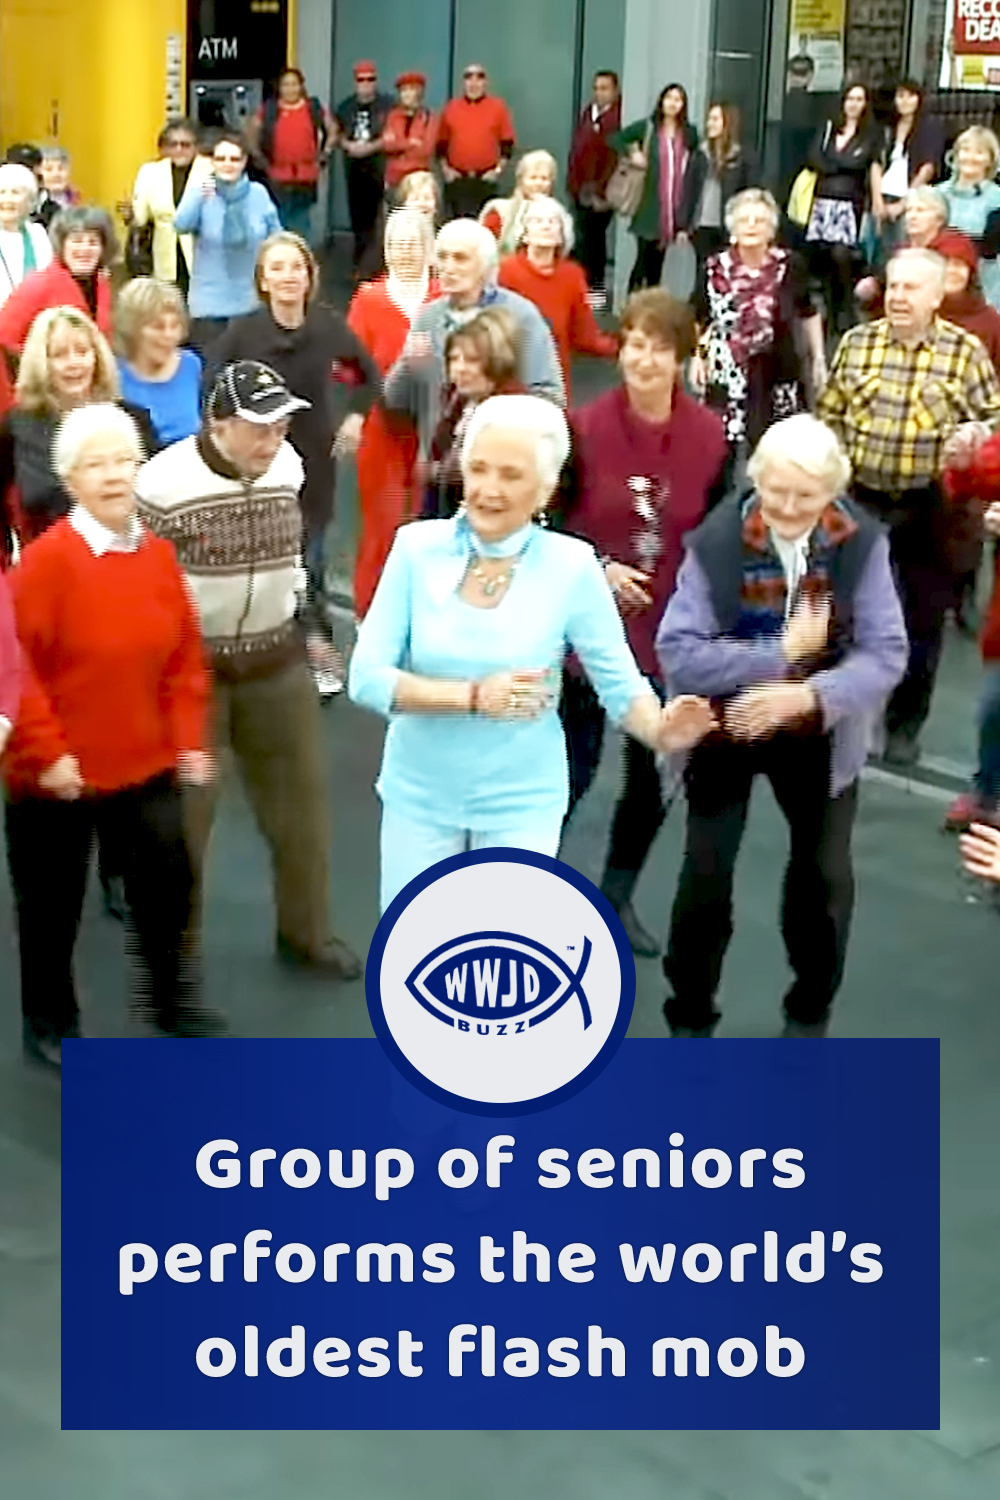 Group of seniors performs the world’s oldest flash mob